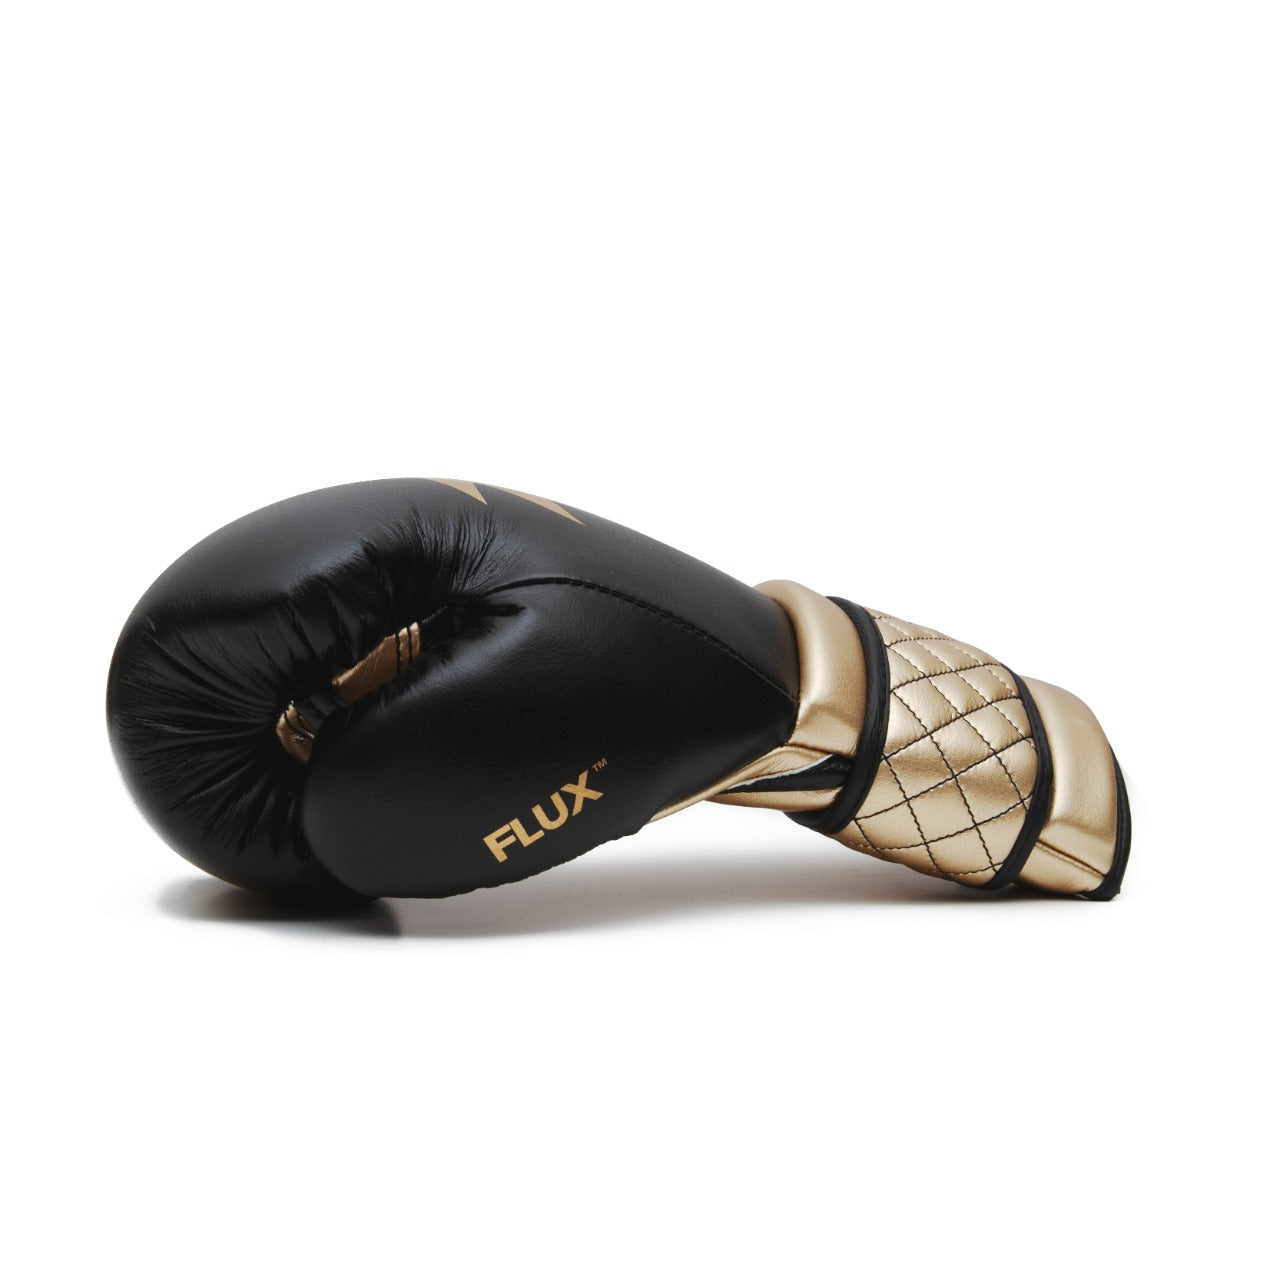 Focus Boxing Gloves | Onyx Gold